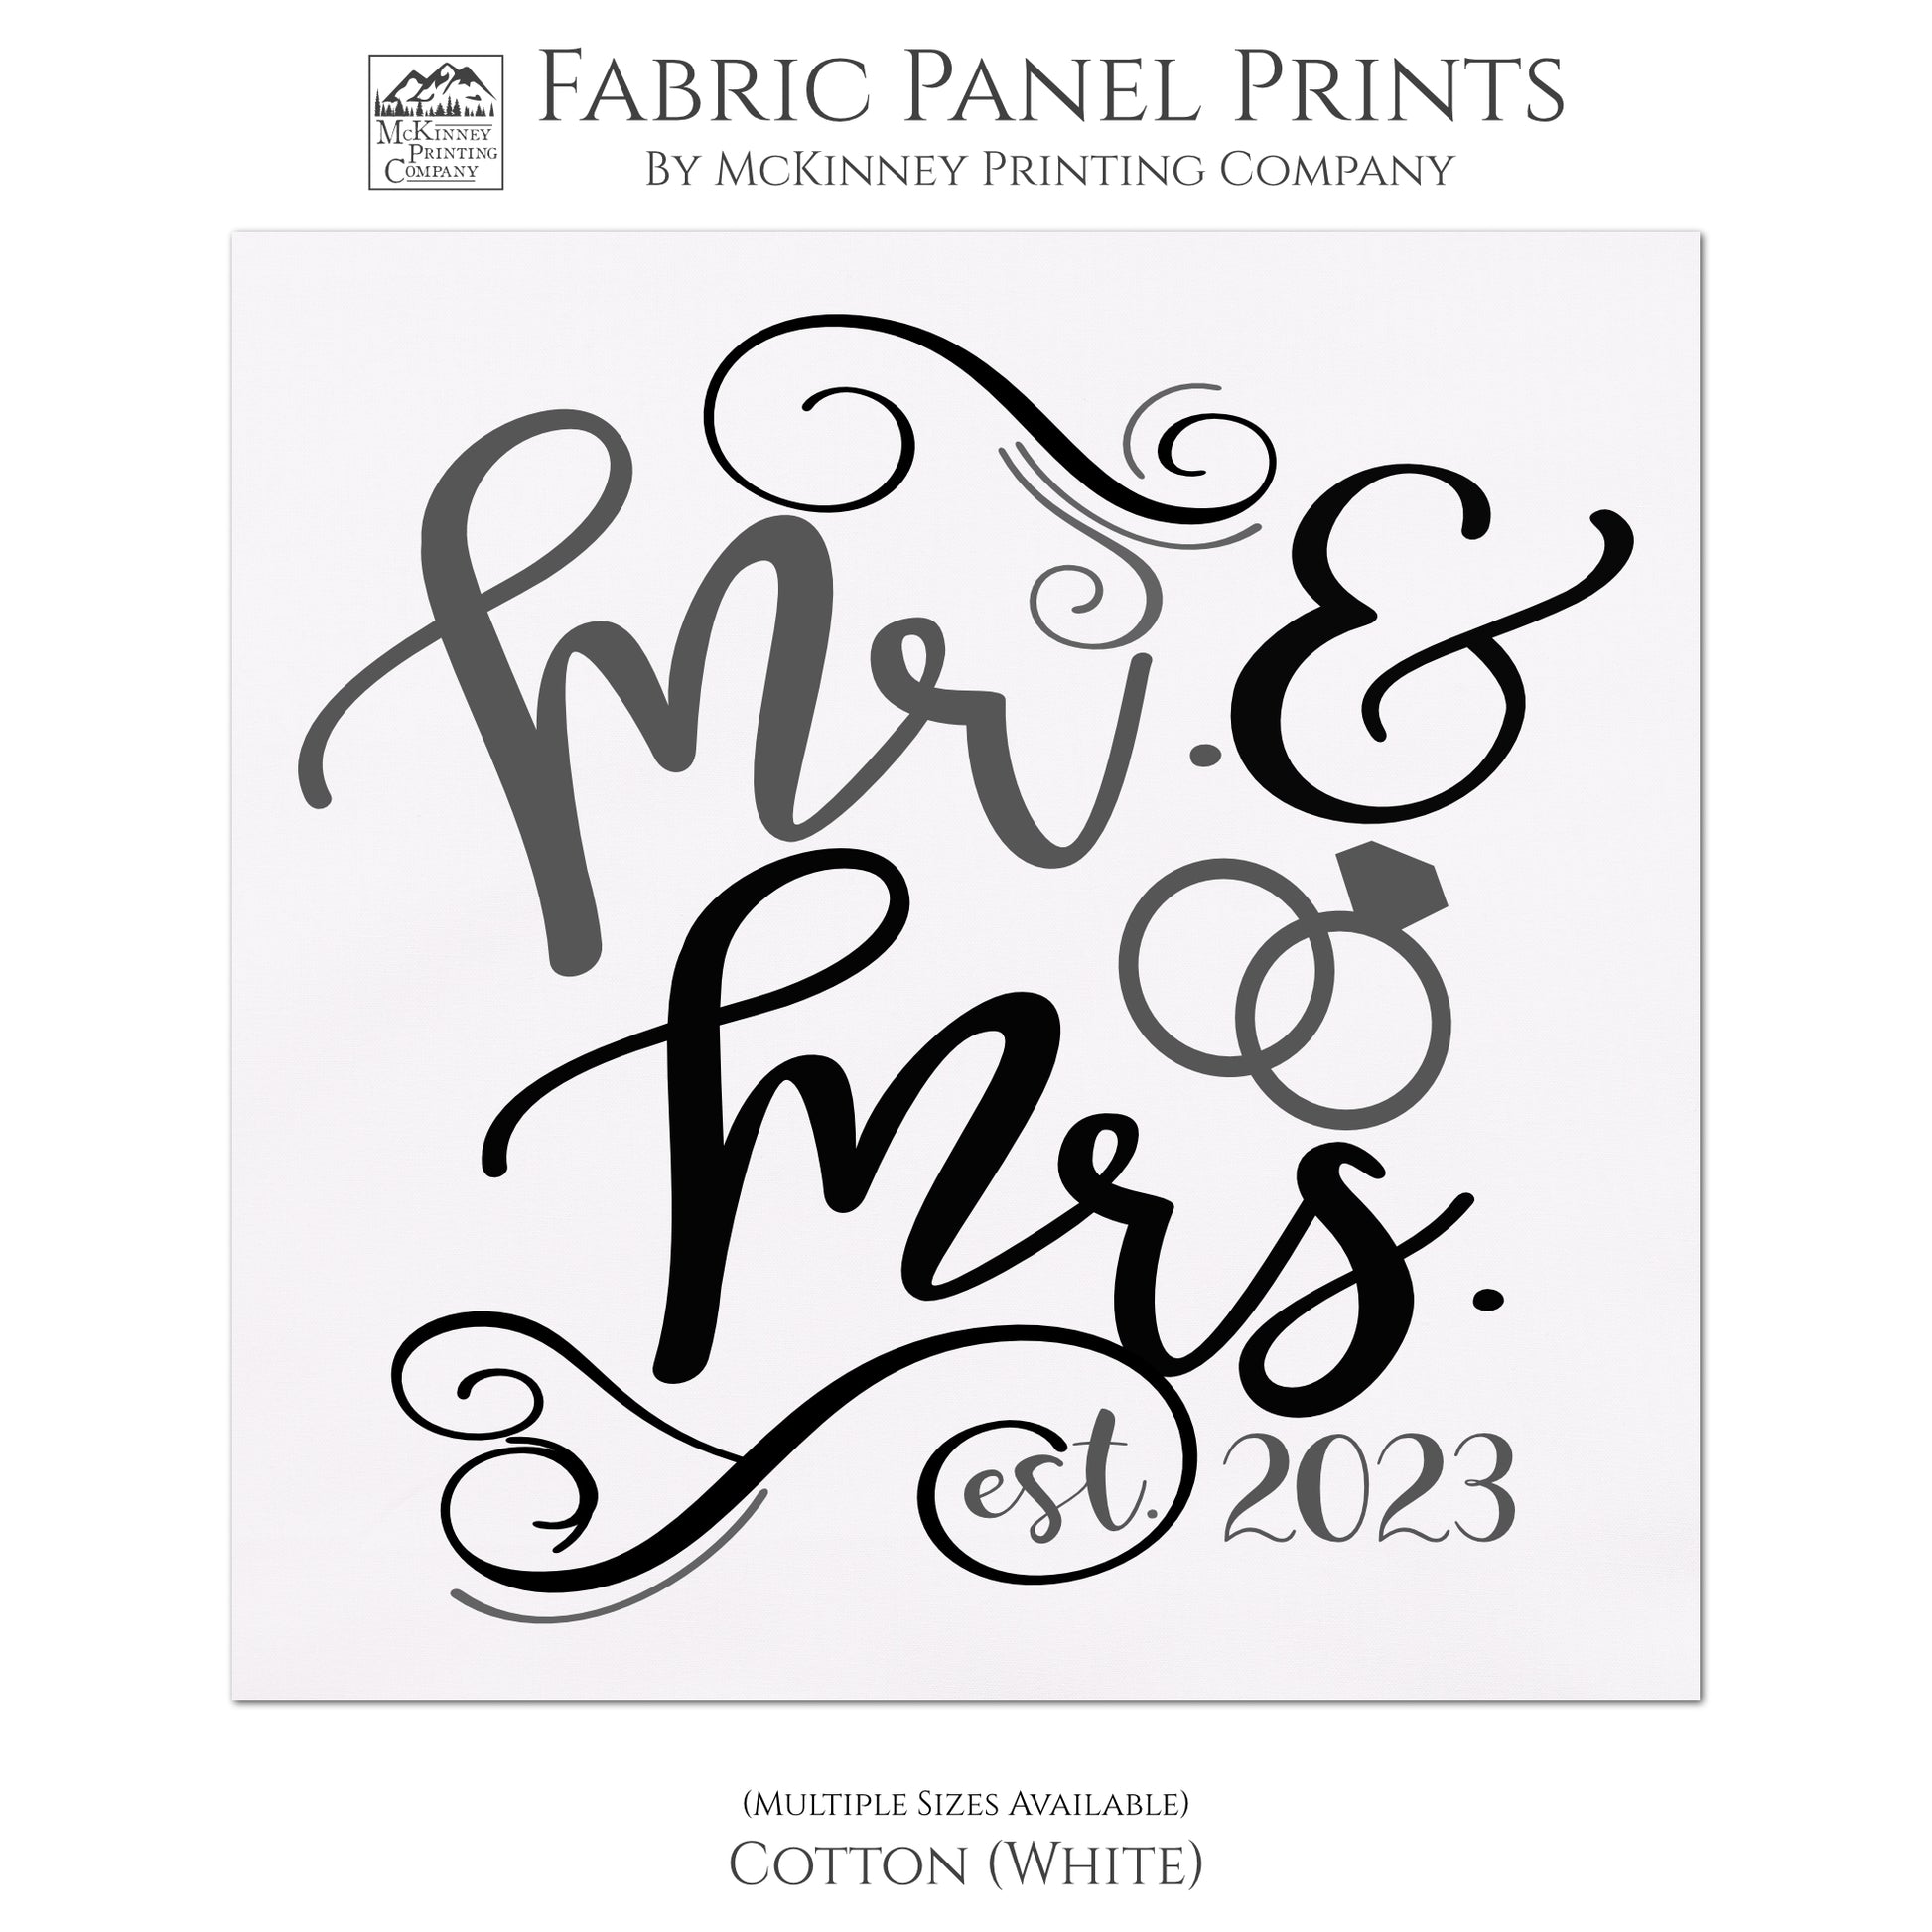 Mr. & Mrs. - Personalized Date, Custom Fabric Panel Print - Wedding, Engagement, Moving In Together, Quilt- Cotton, White